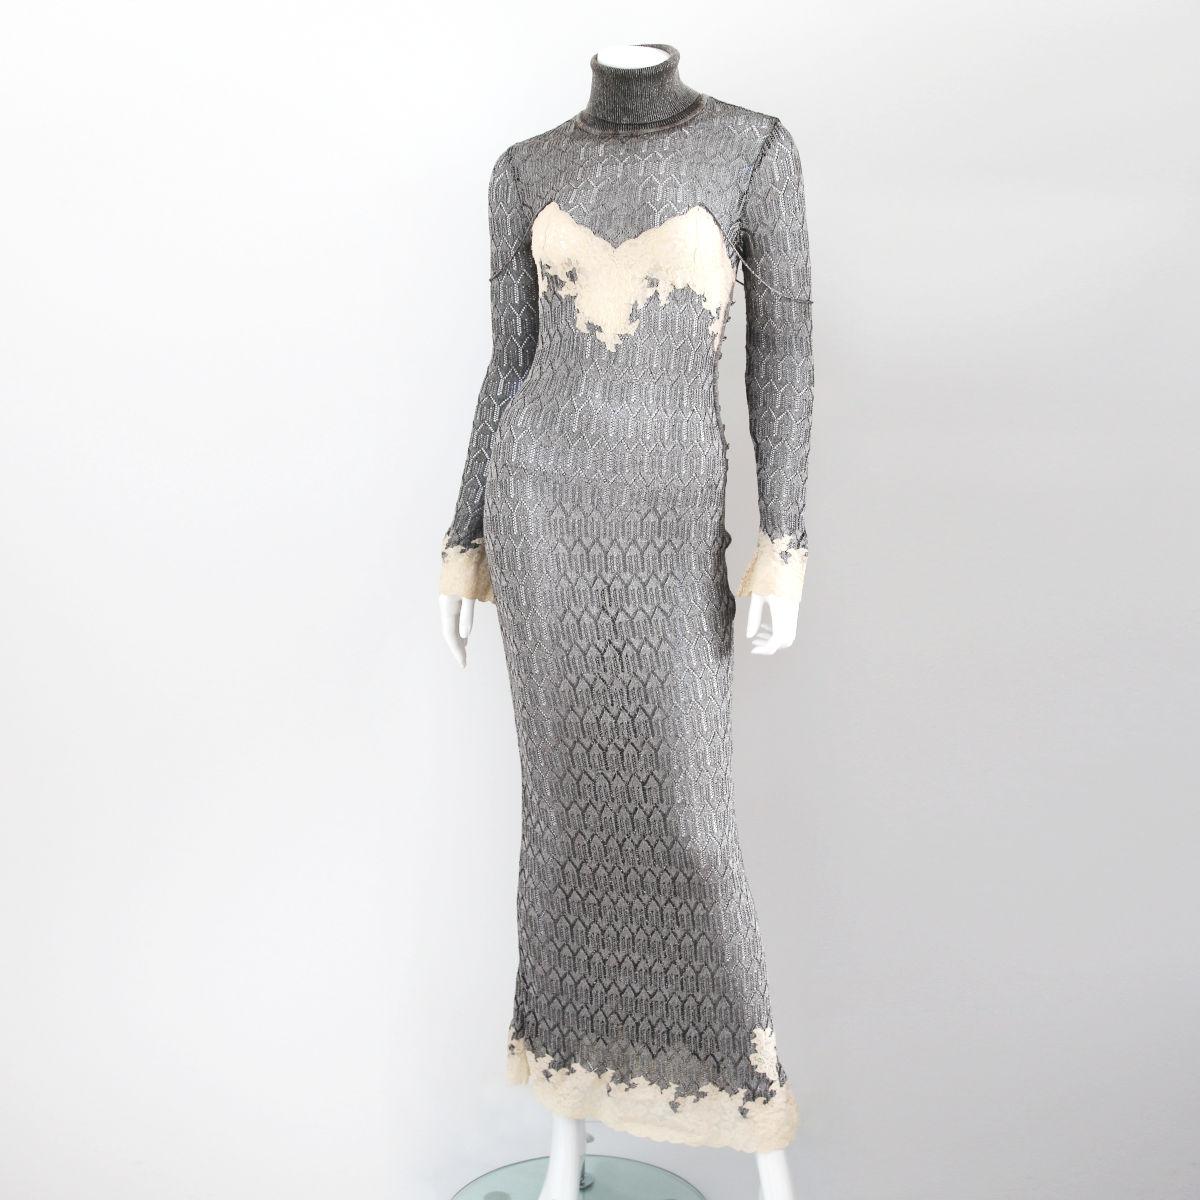 CHRISTIAN DIOR 1998 Sheer Silver Gown / Dress by John Galliano 3